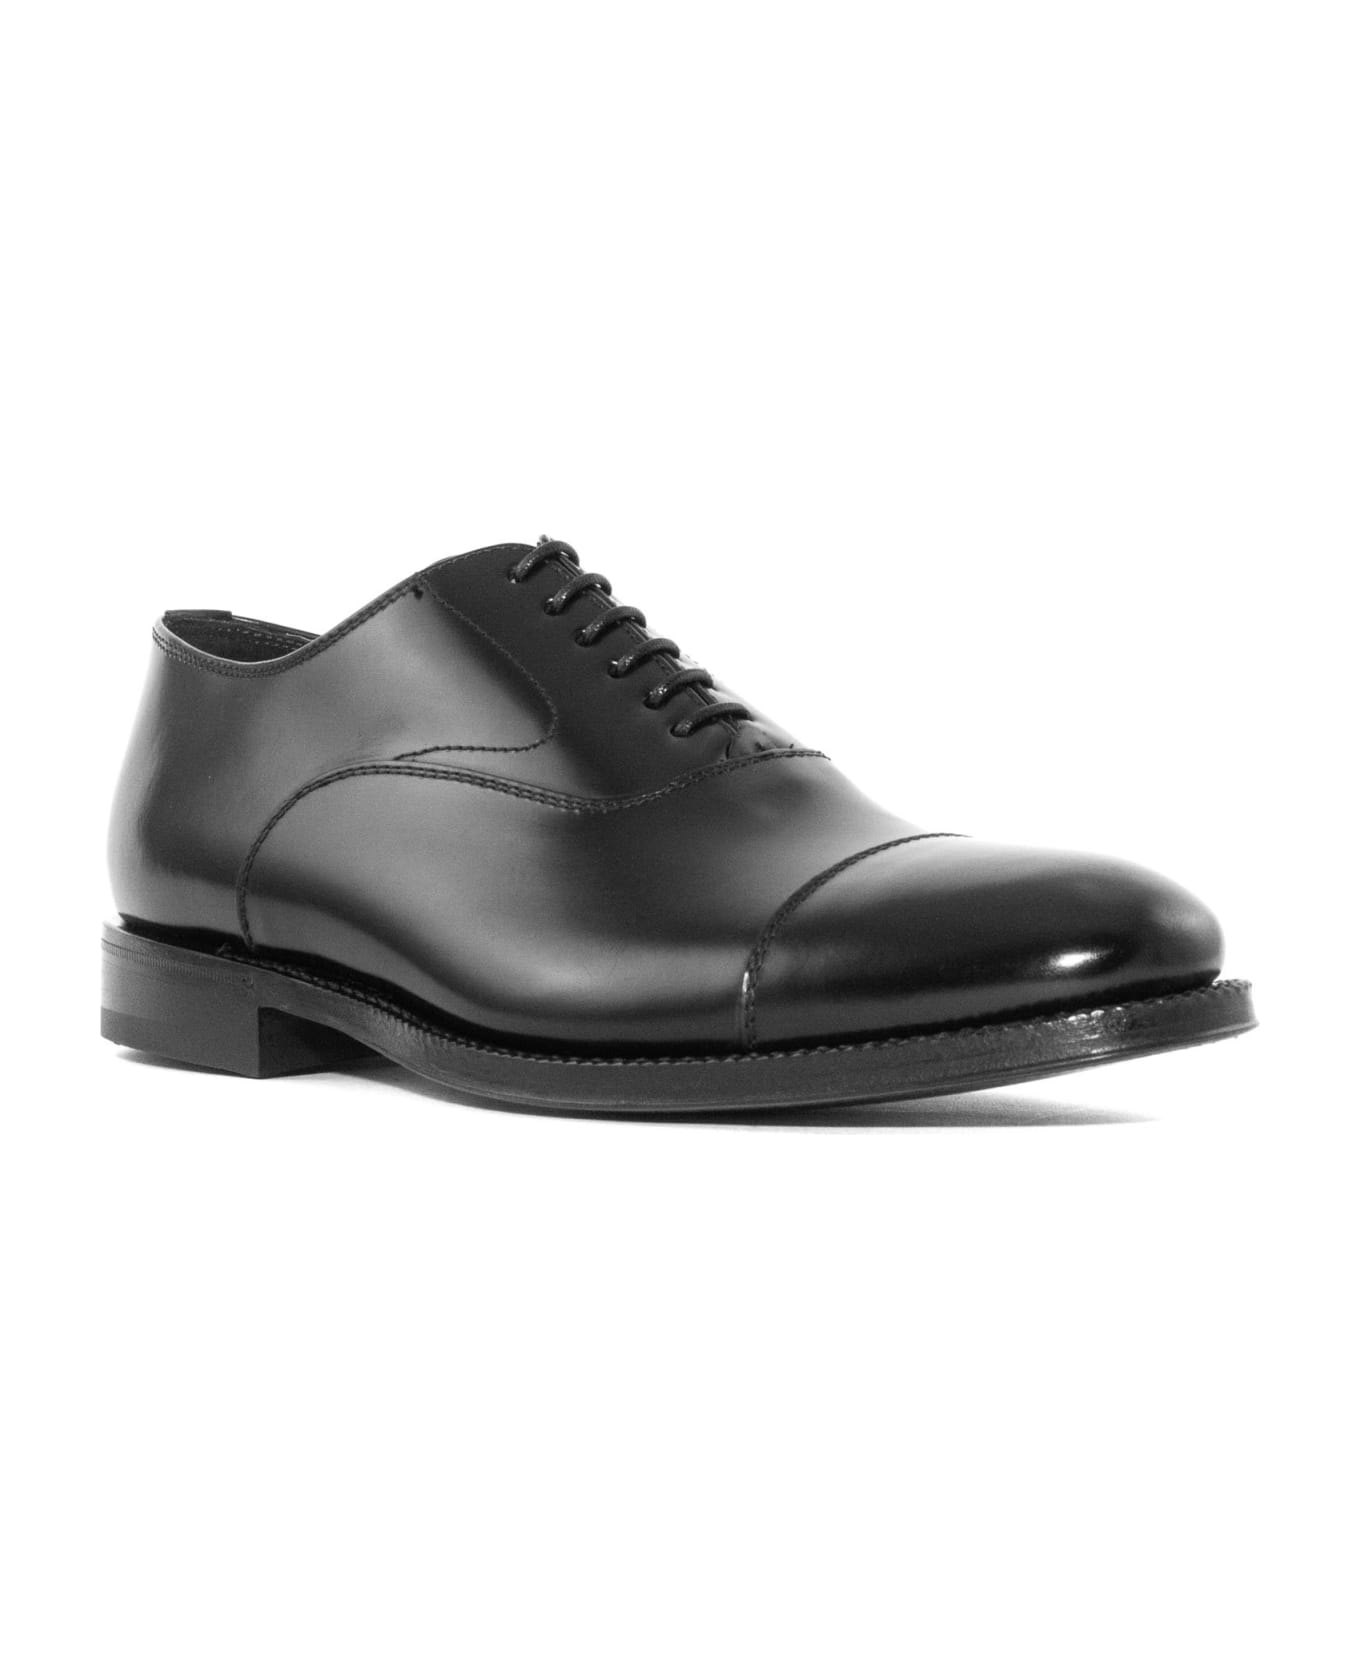 Green George Black Brushed Leather Oxford Armour Shoes - Black